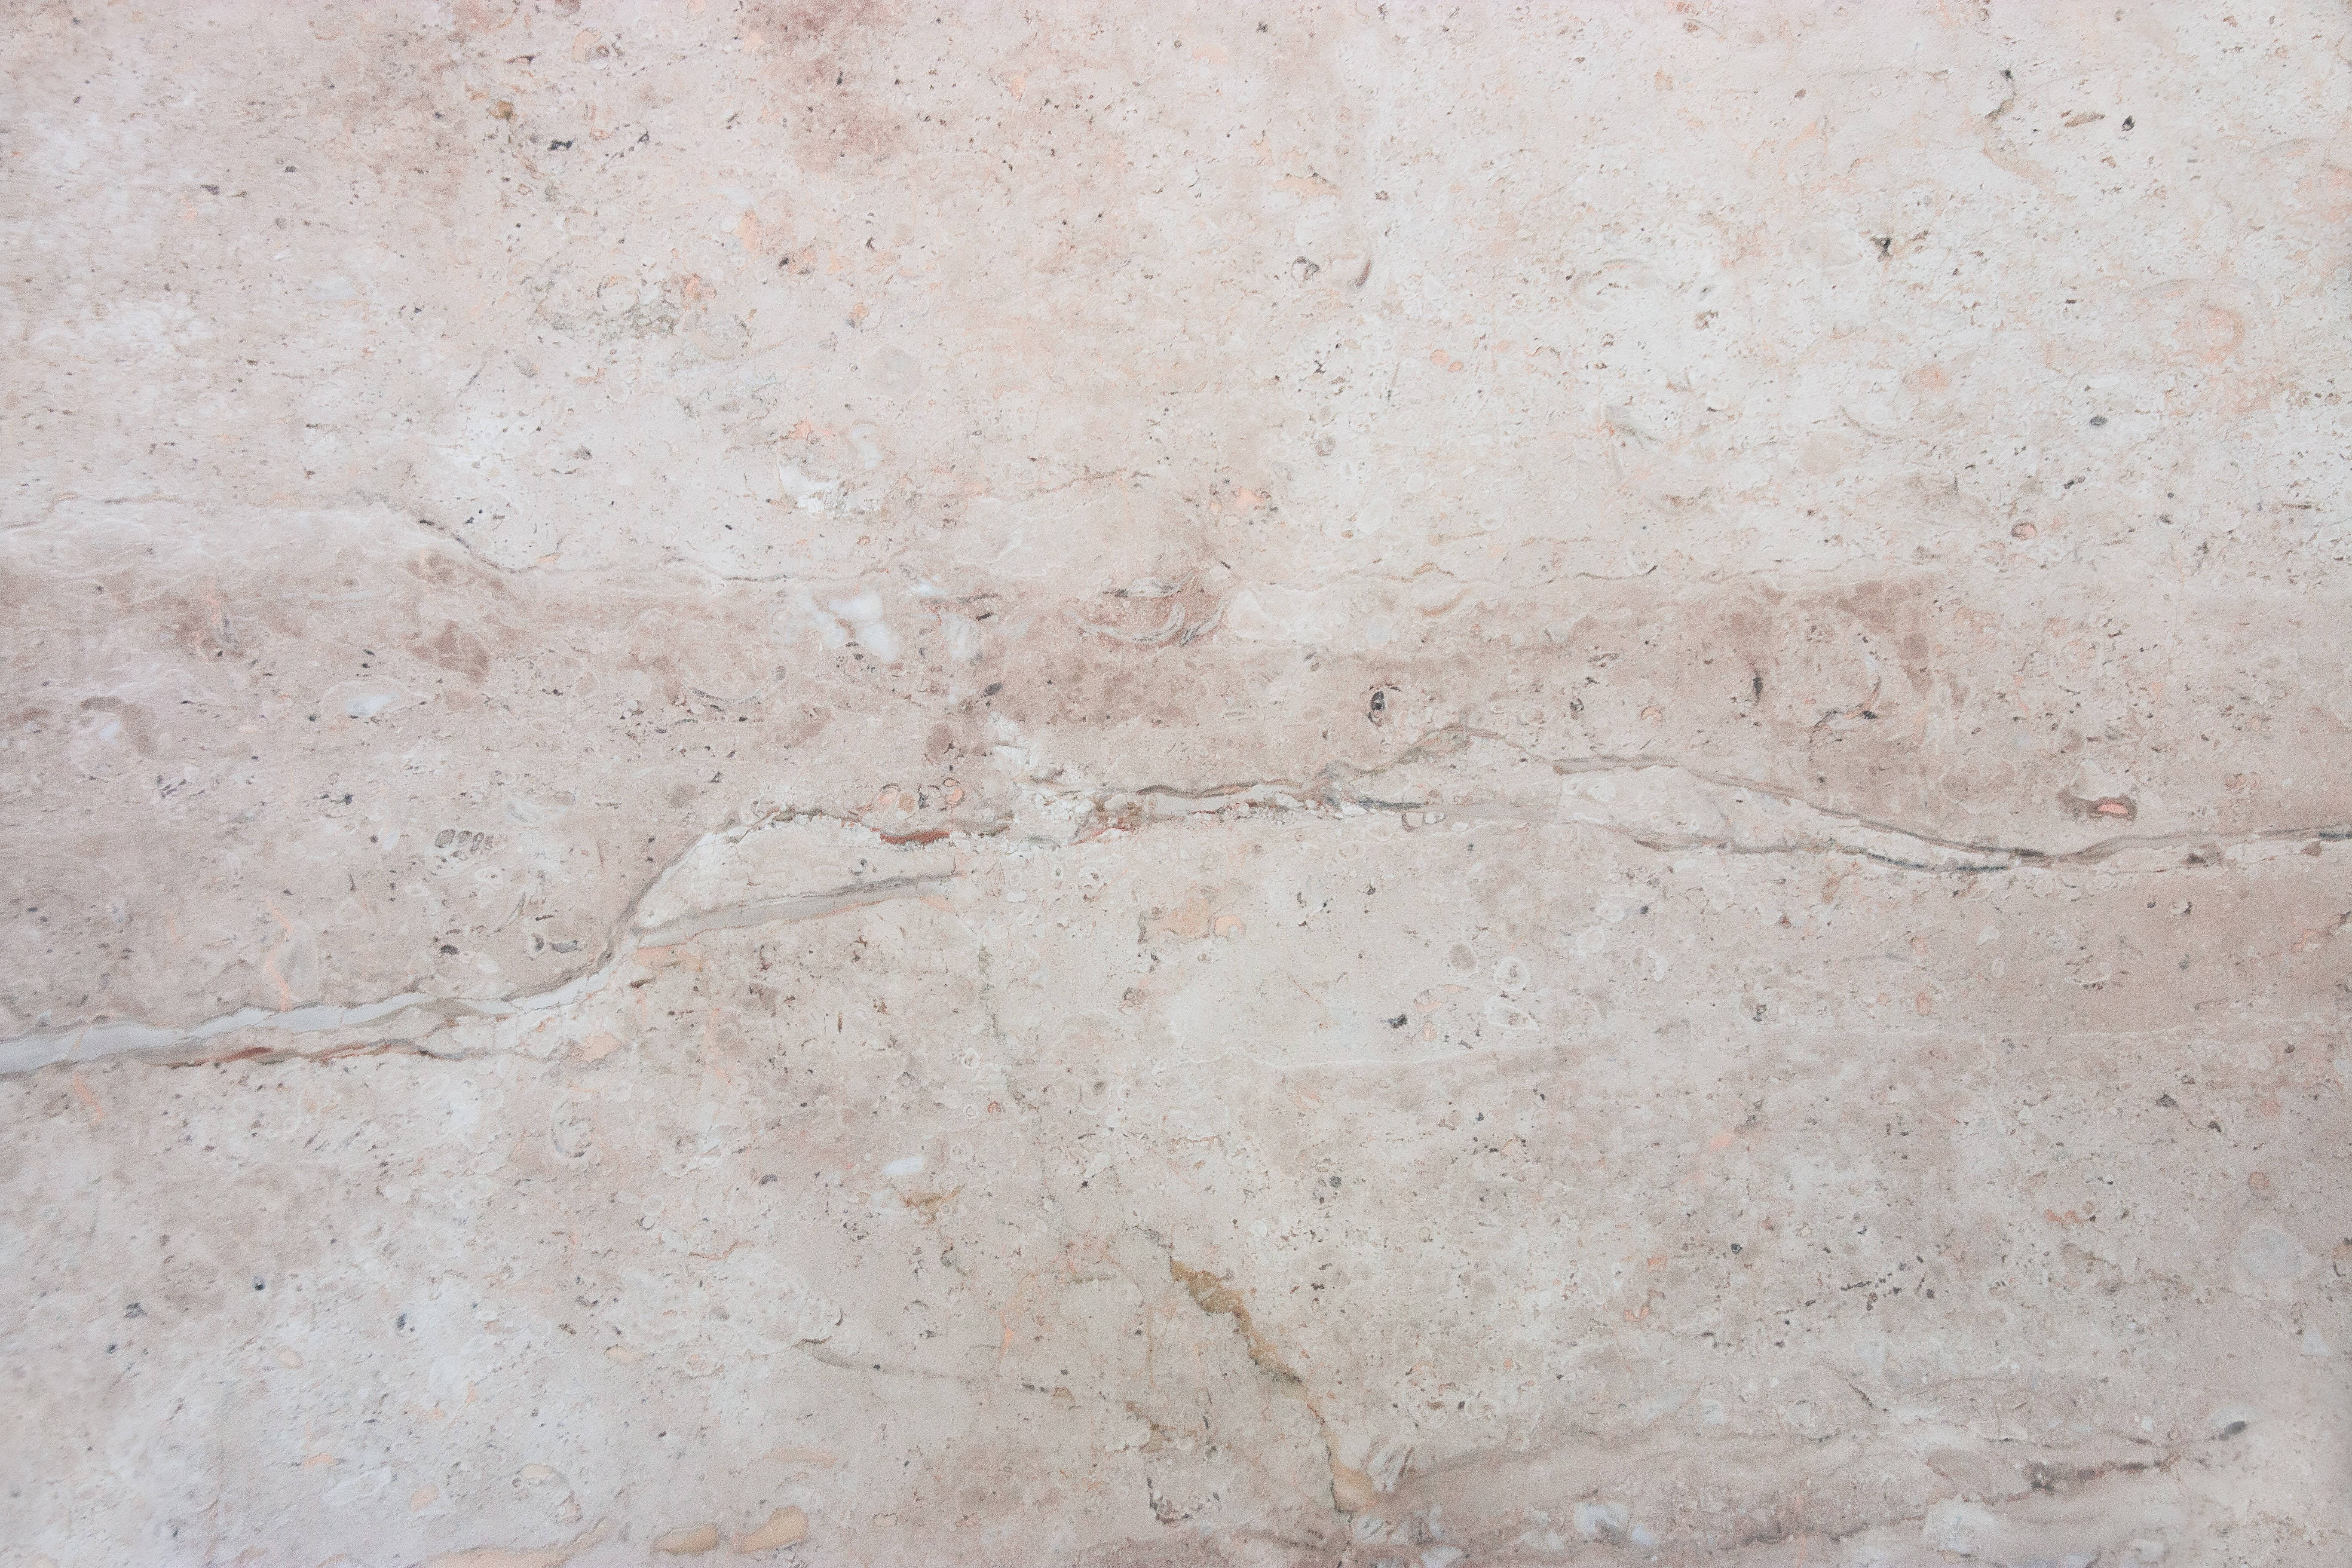 Caption: Enchanting Cream Stone Texture Marble in 4K Resolution Wallpaper